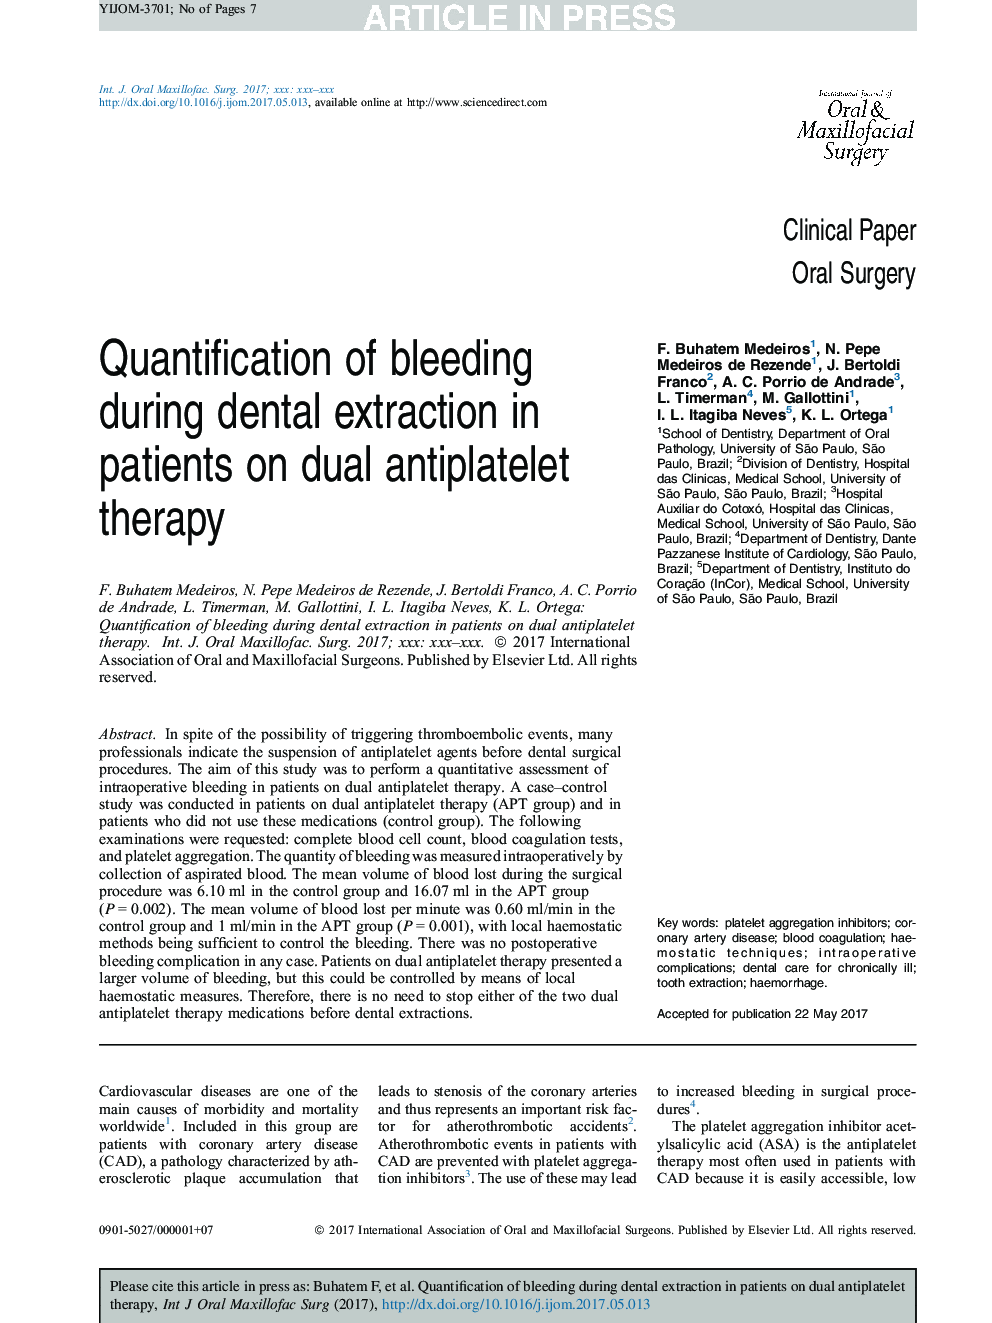 Quantification of bleeding during dental extraction in patients on dual antiplatelet therapy